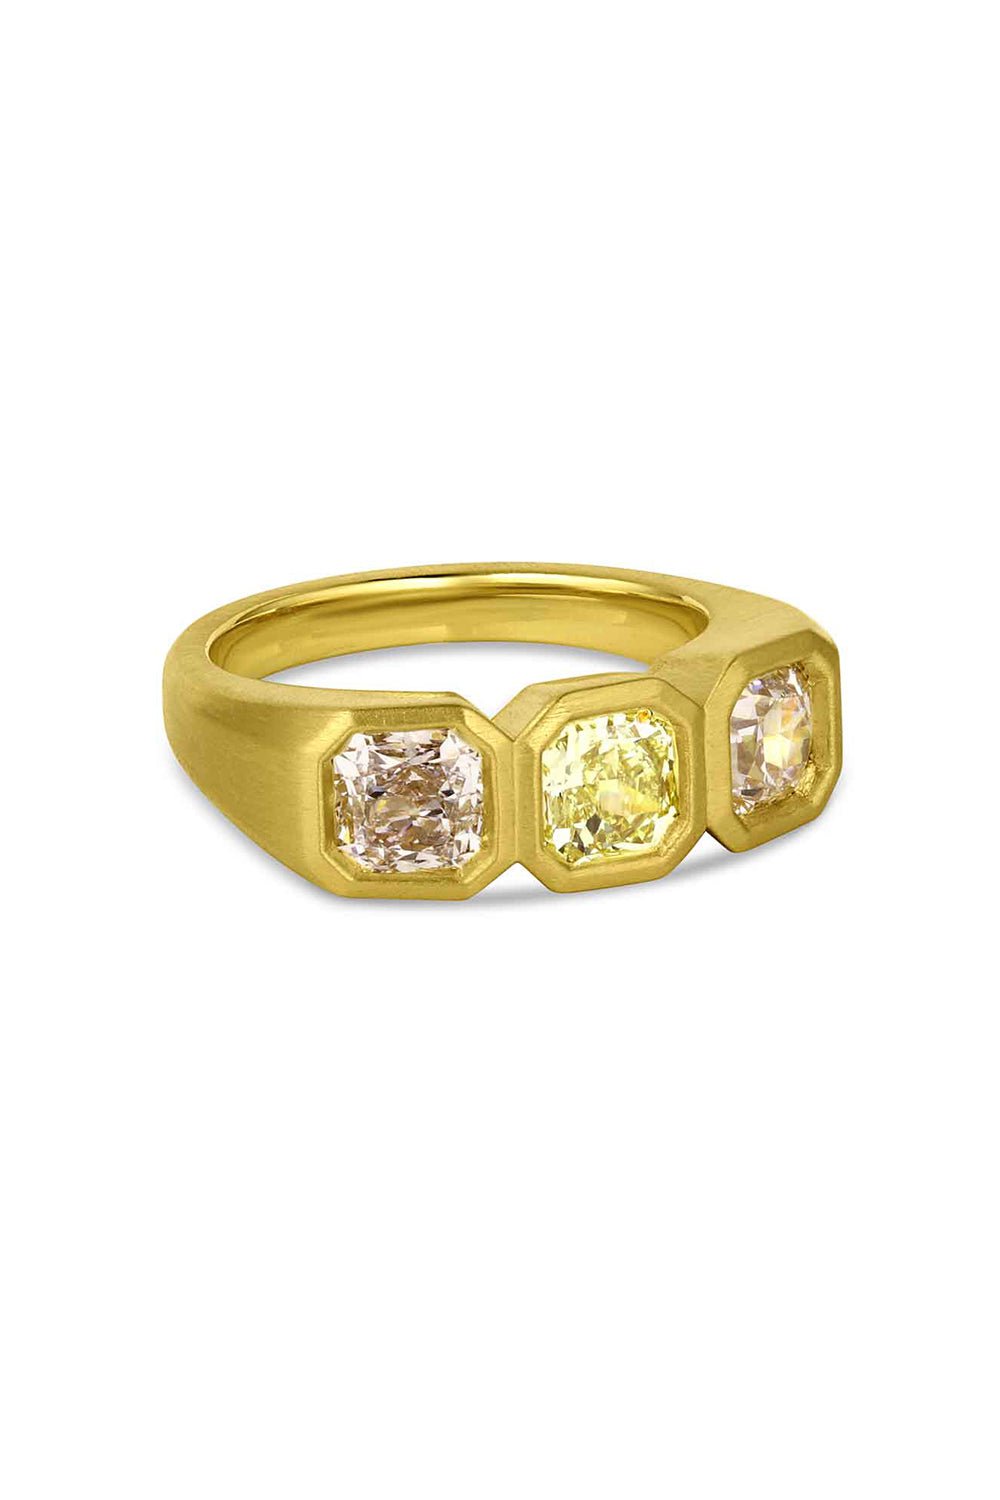 LEIGH MAXWELL-Fancy Three Stone Ring-YELLOW GOLD